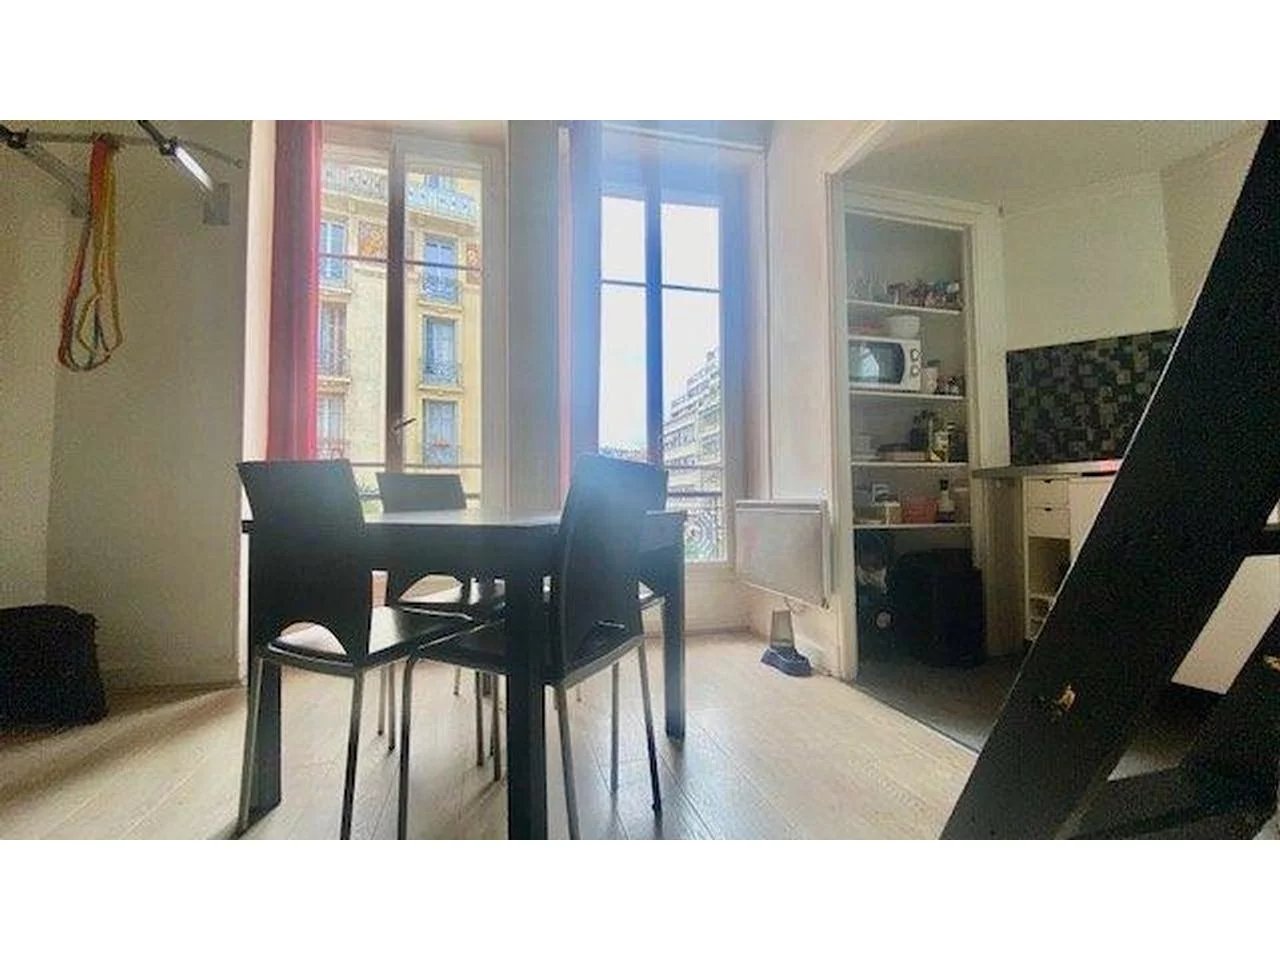 Appartement  1 Rooms 23m2  for sale   130 000 €